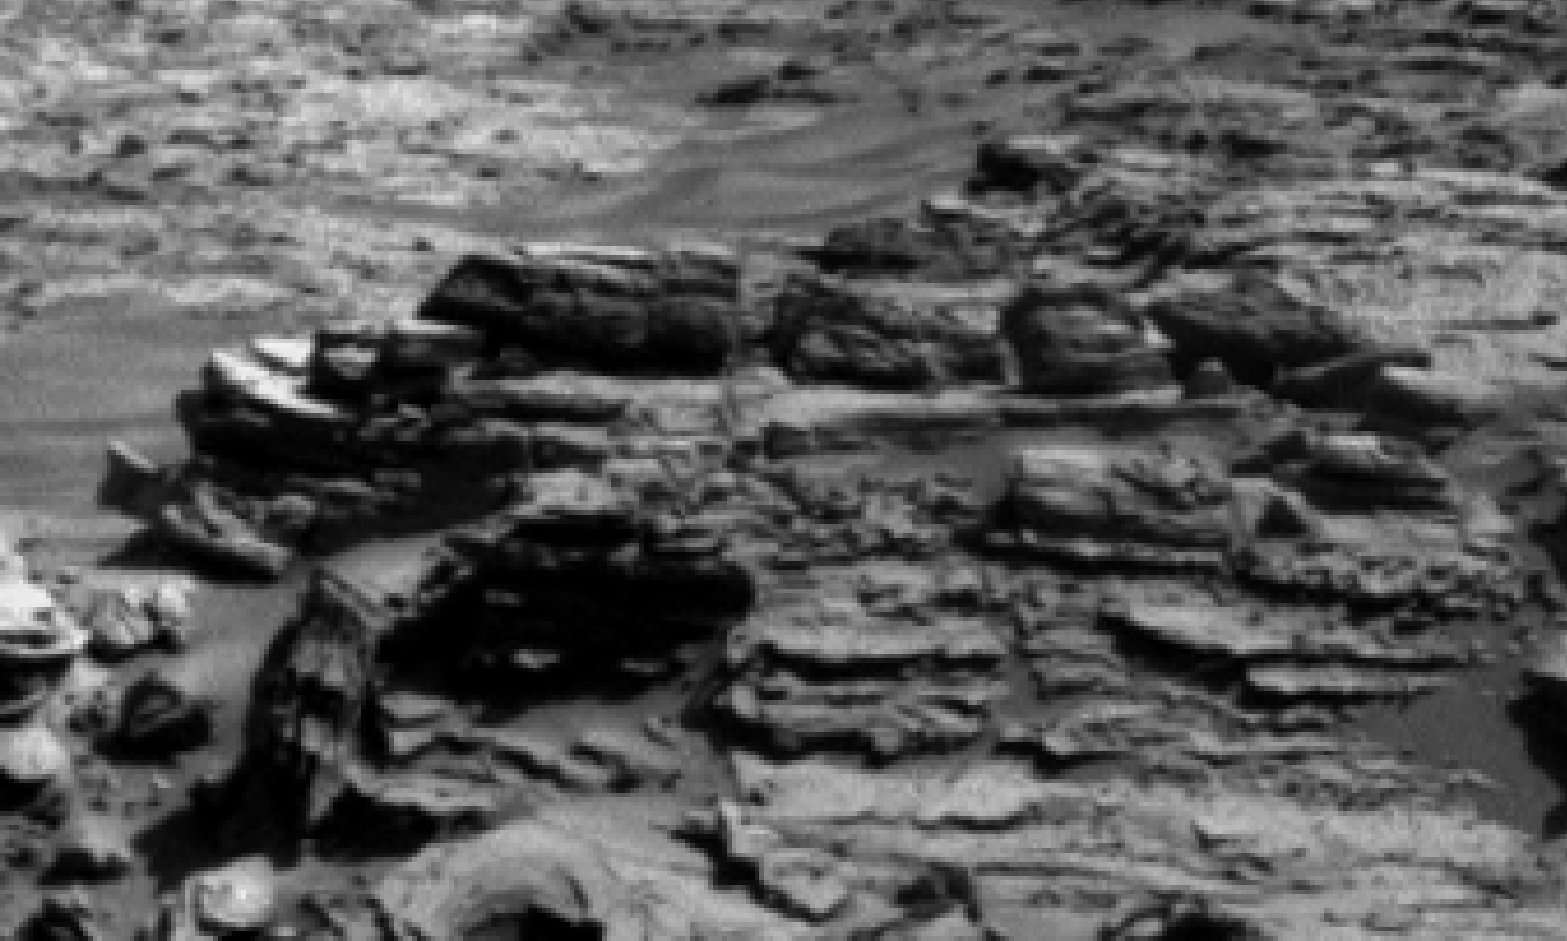 mars sol 1301 anomaly-artifacts 2 was life on mars